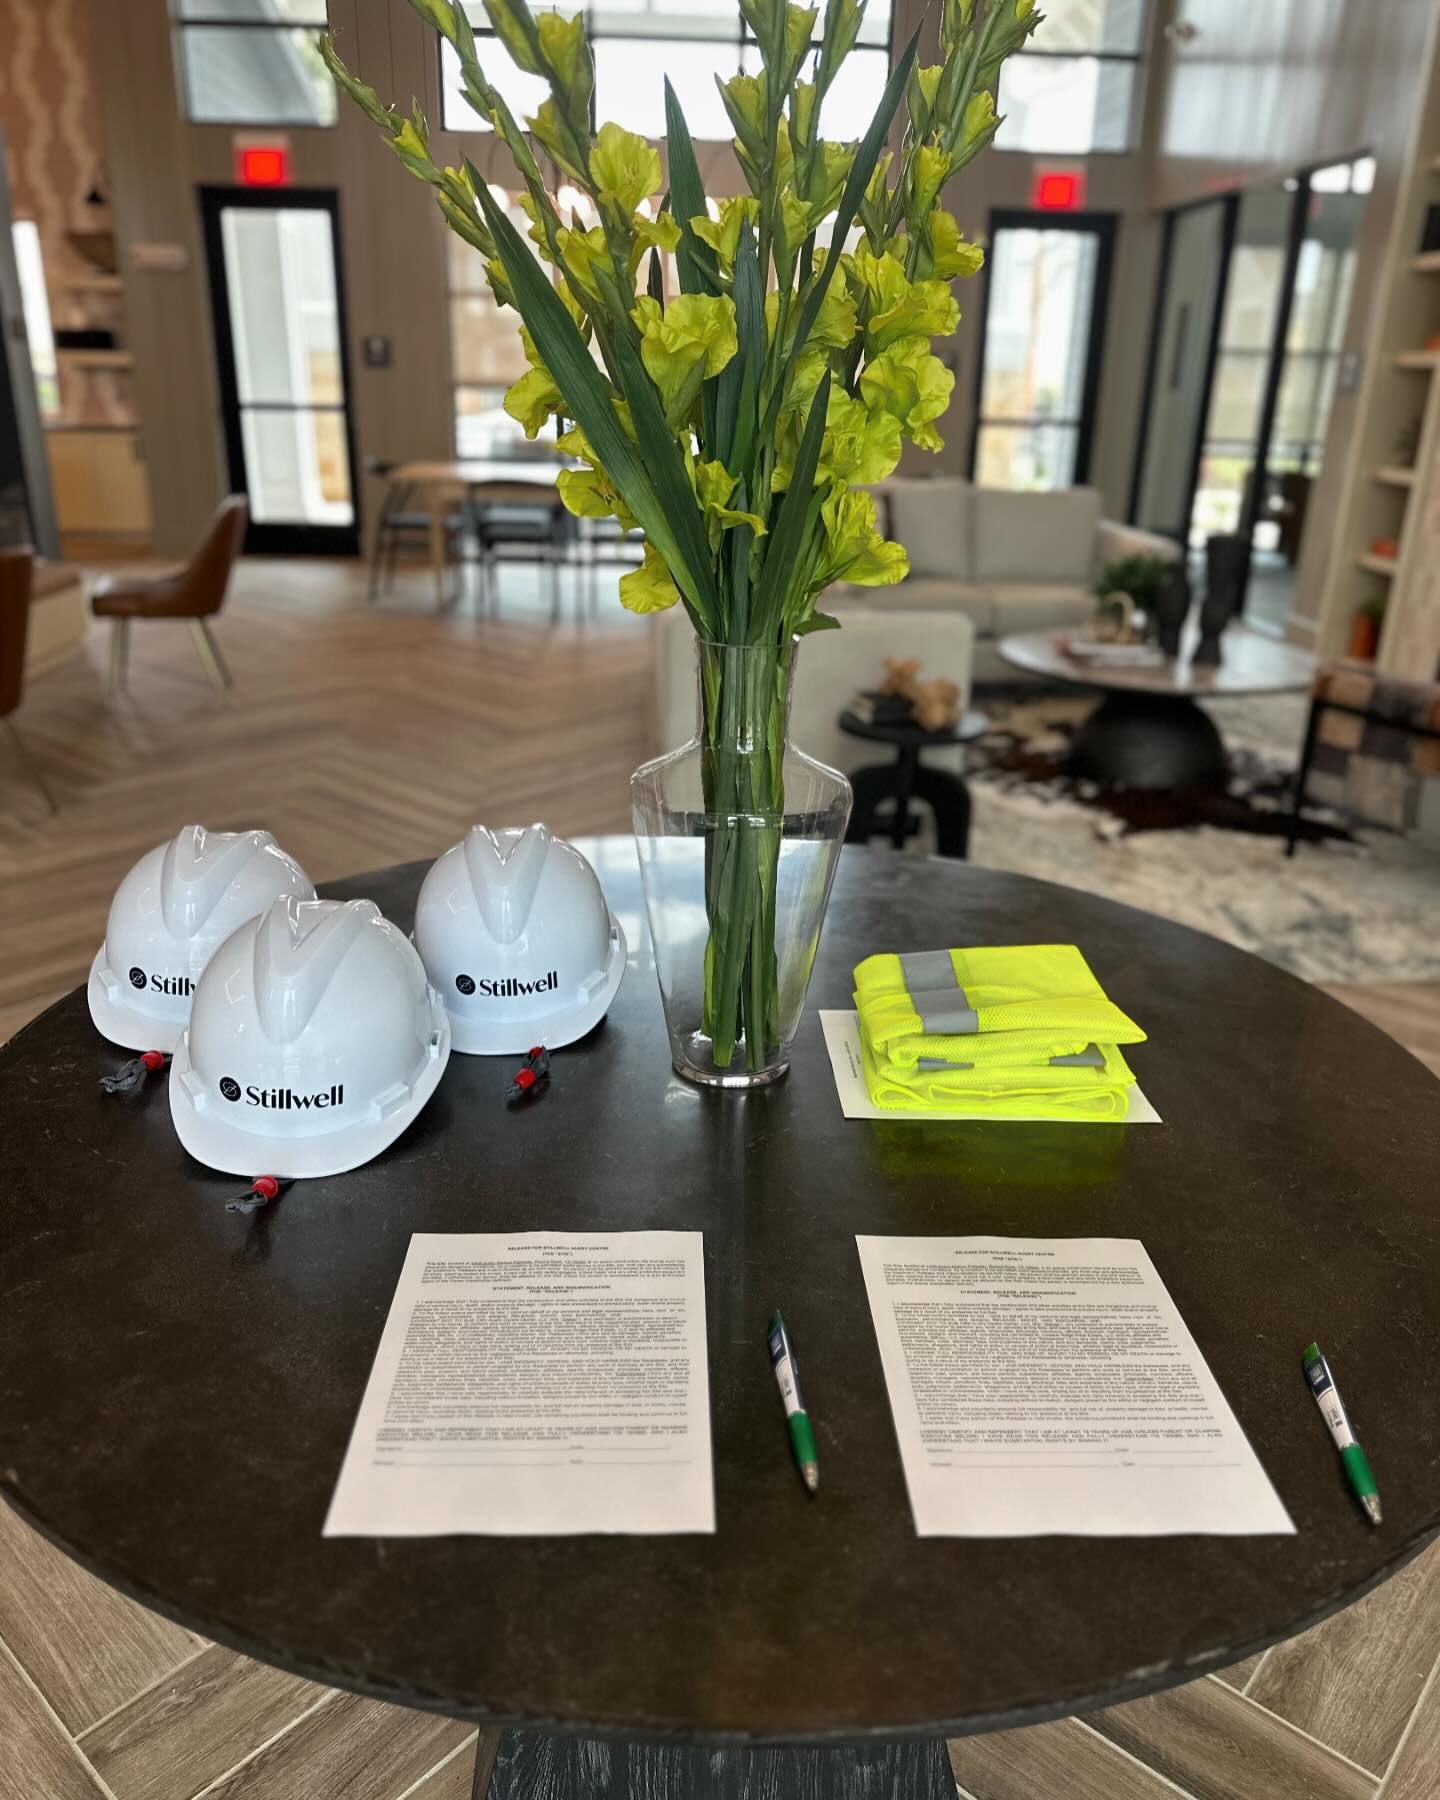 Hard Hat tours are back this week starting on Thursday! 👷Call, DM, or text soon so we can get your appointment booked soon before they fill up! 😁 #coastalridge #realestate #rrtx #newhomes #forrent #luxury #upscale #lovewhereyoulive #stillwell #texa